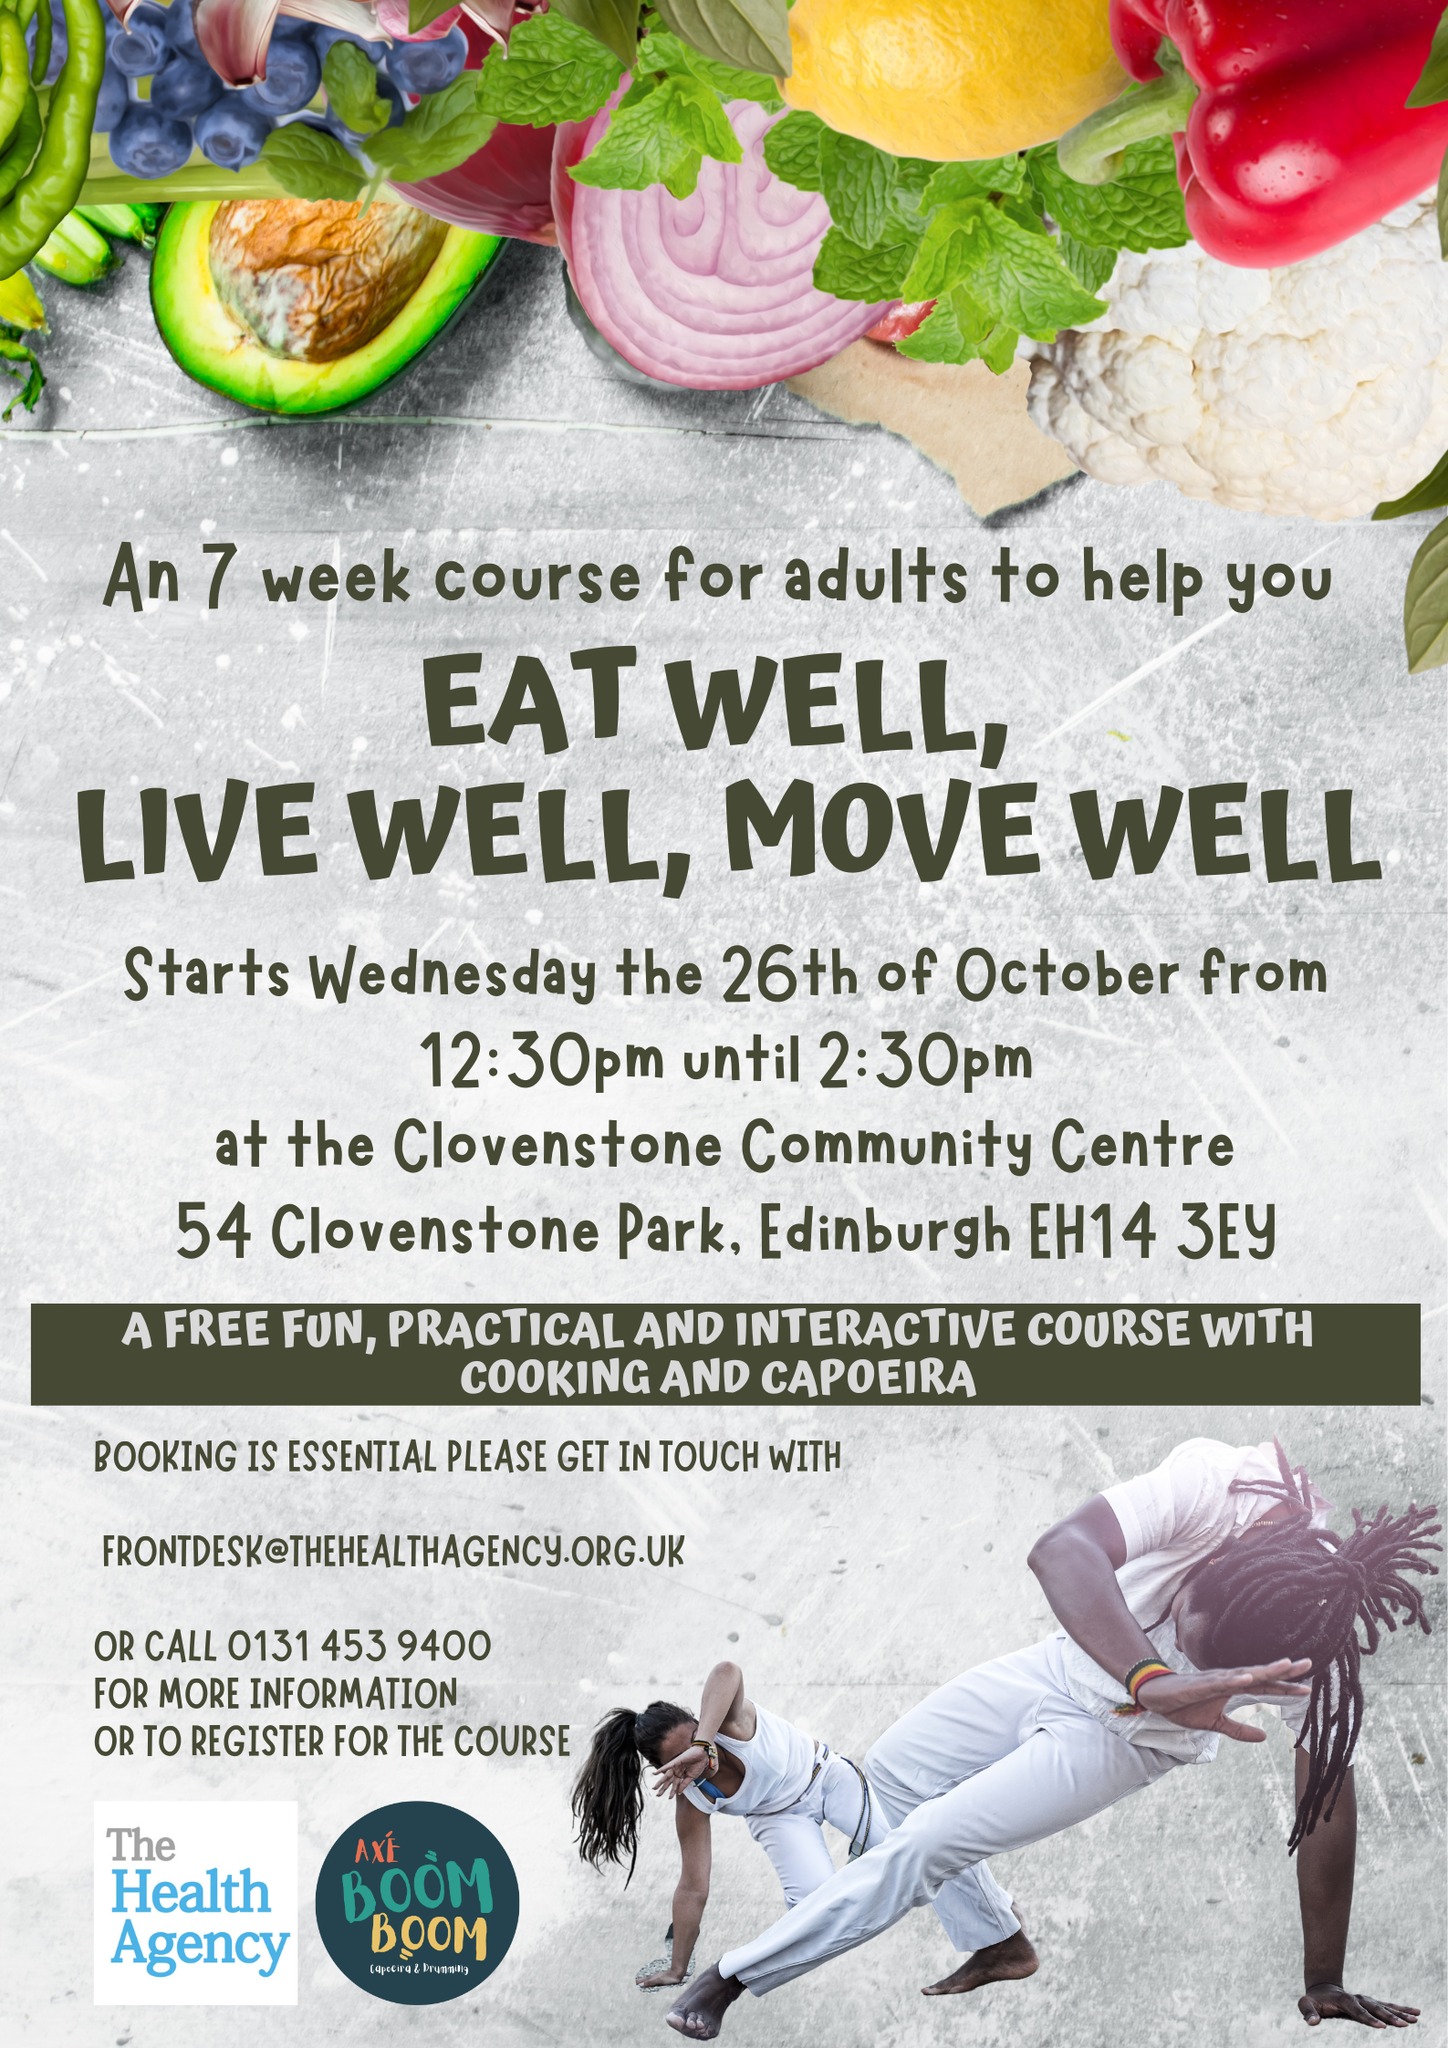 eat-well-live-well-move-well-poster-featured-image